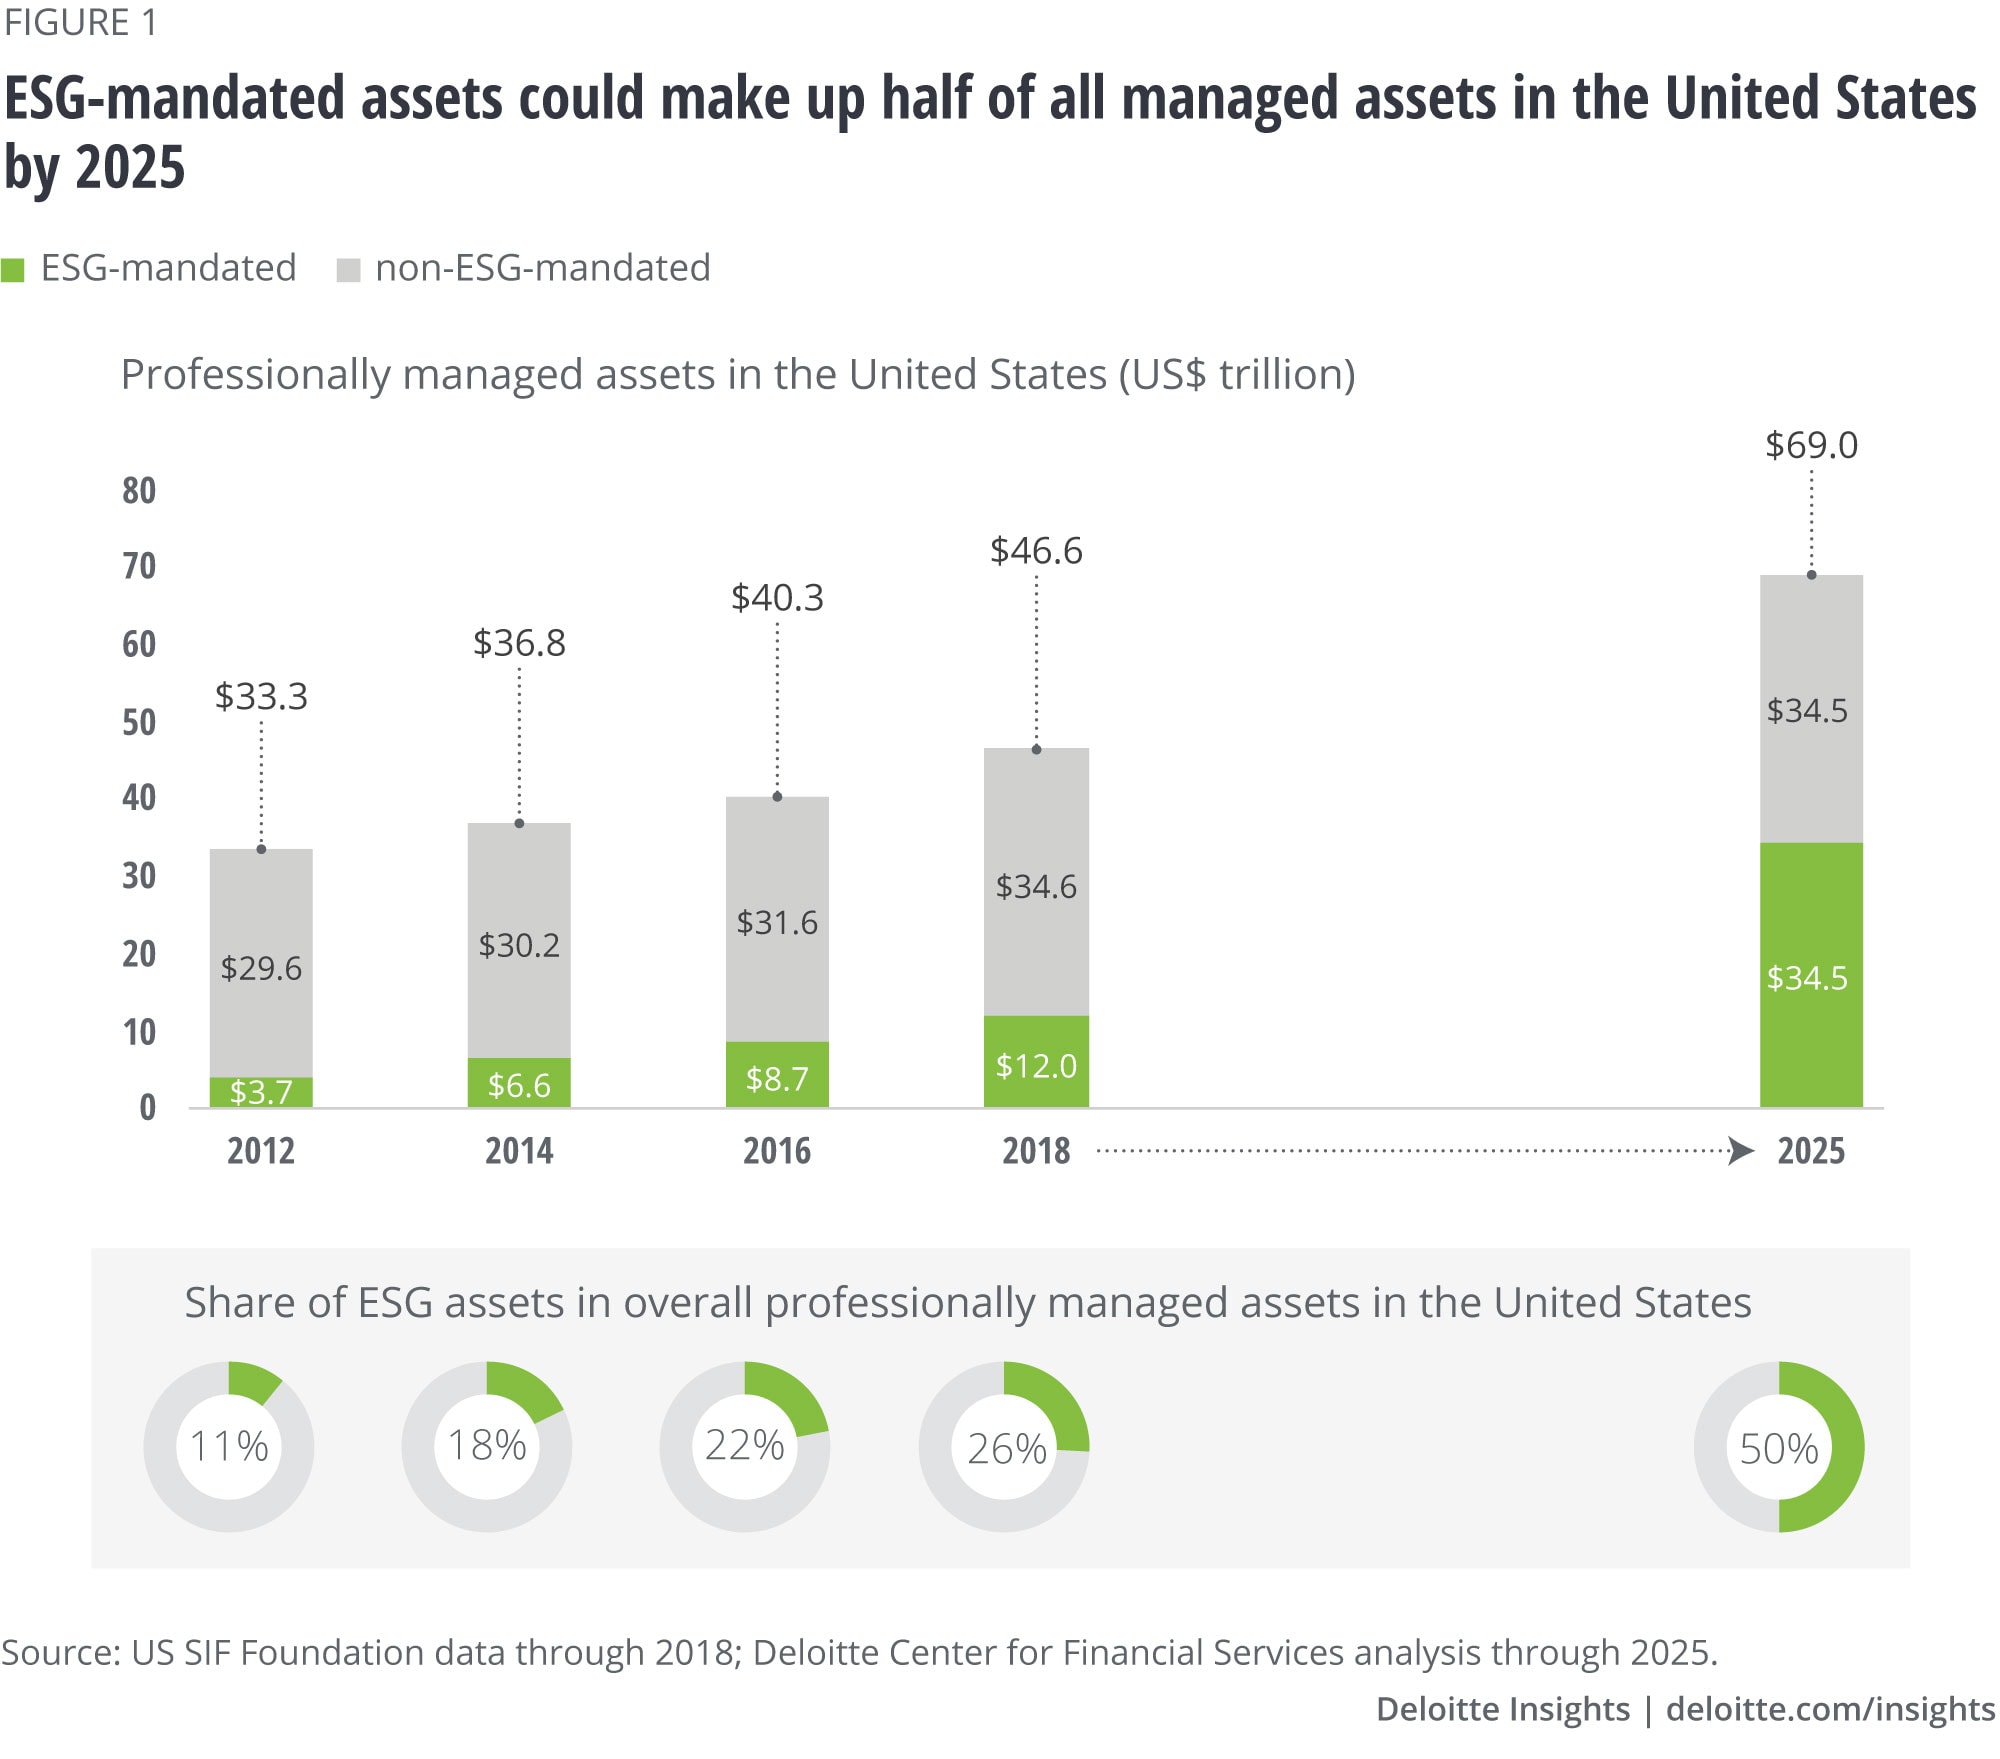 ESG-mandated assets could make up half of all managed assets in the United States by 2025